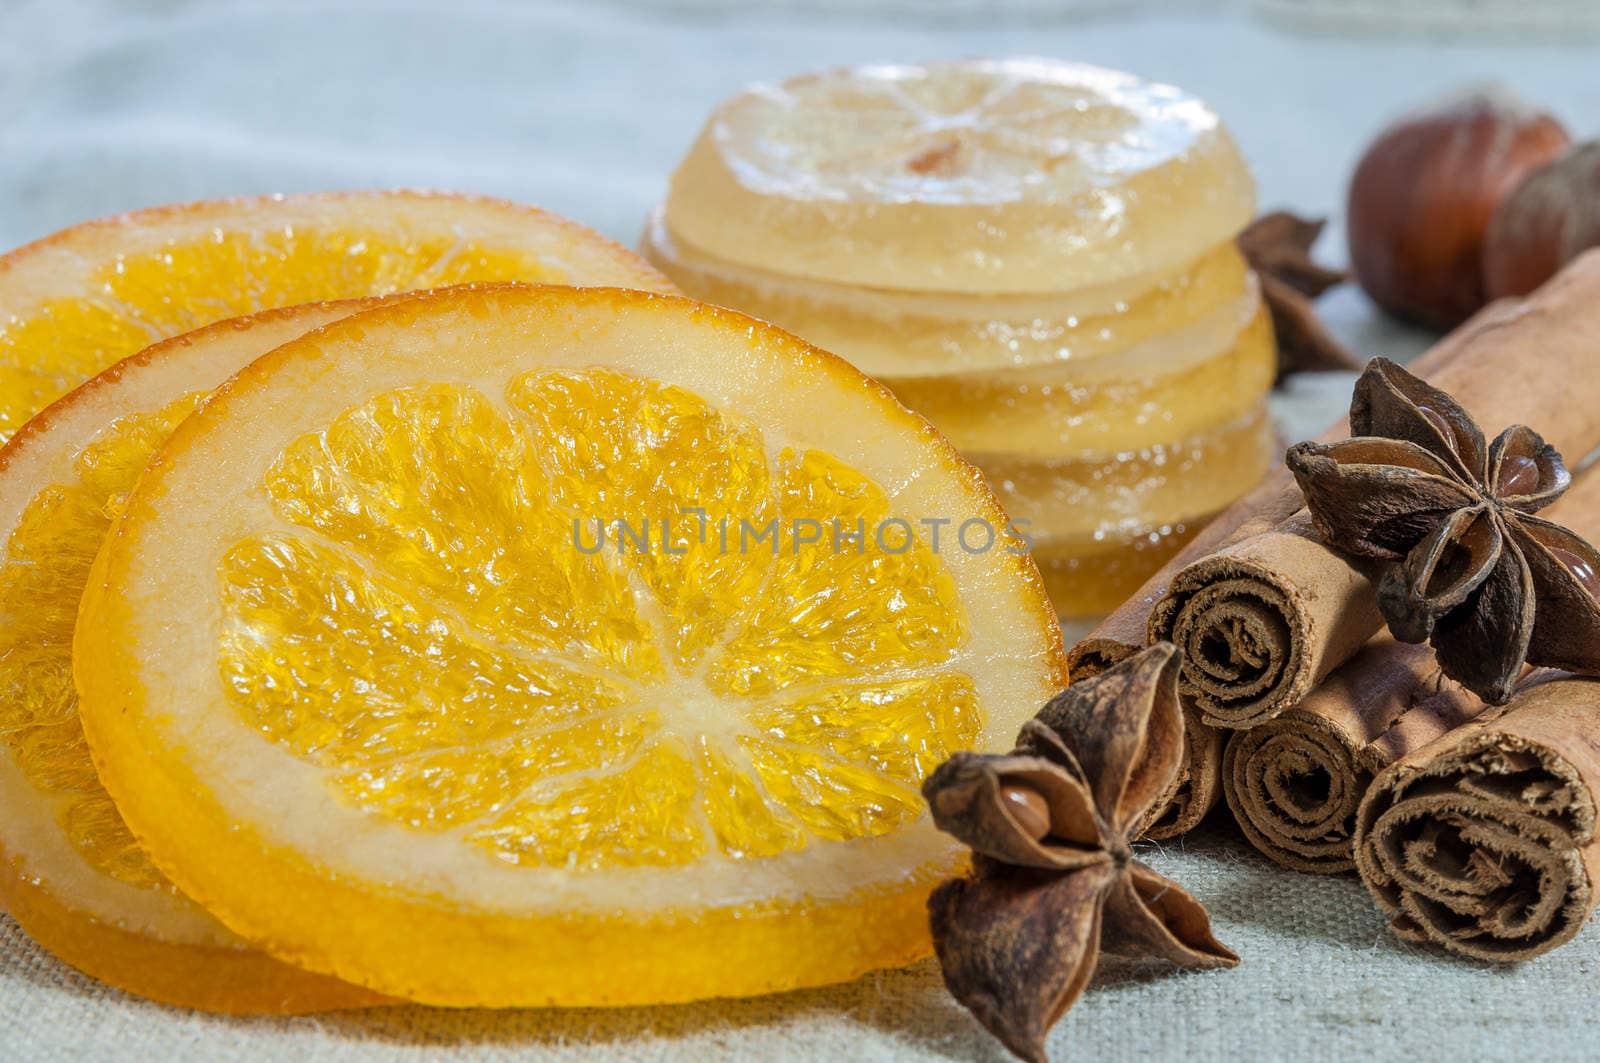 Orange slices and dried lemons decorated with cinnamon and hazelnuts